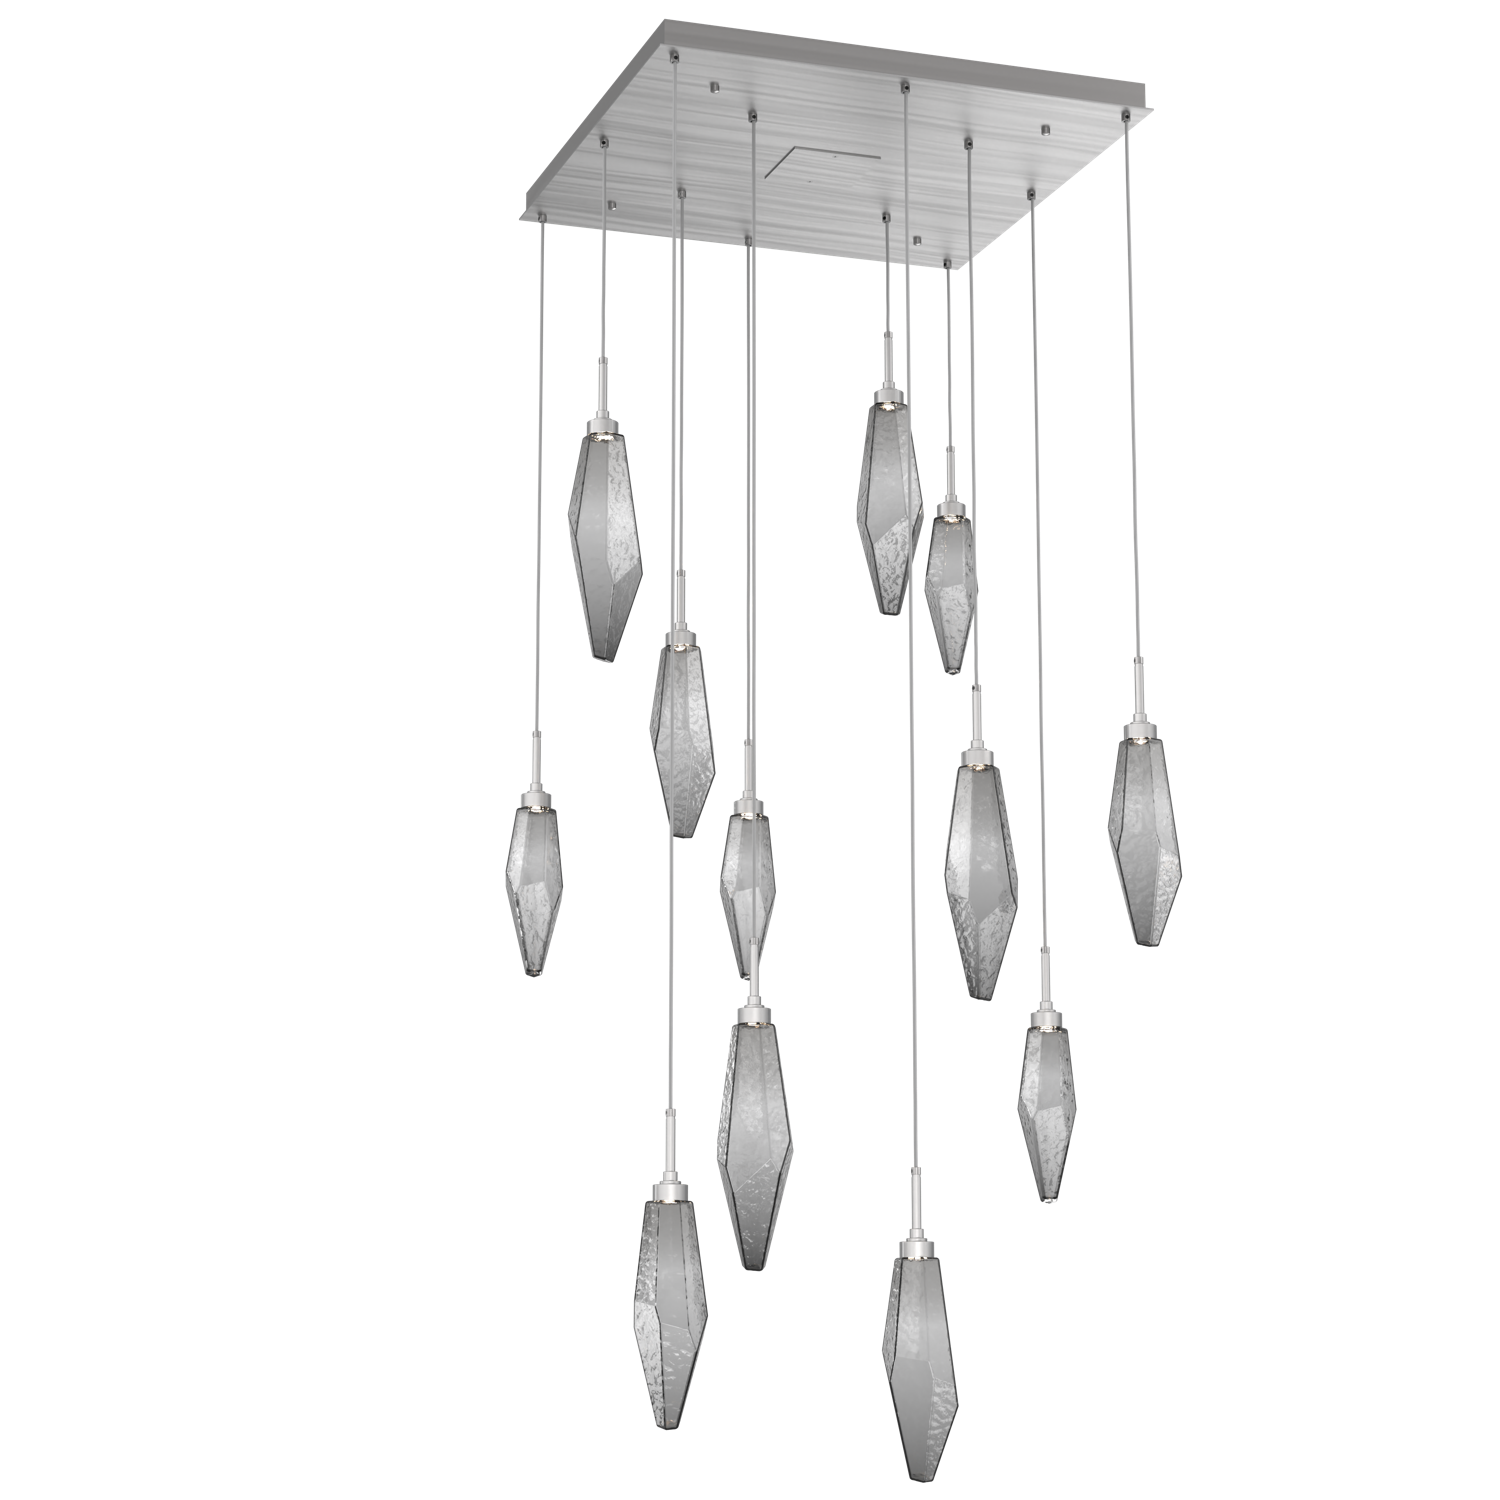 CHB0050-12-SN-CS-Hammerton-Studio-Rock-Crystal-12-light-square-pendant-chandelier-with-satin-nickel-finish-and-chilled-smoke-glass-shades-and-LED-lamping